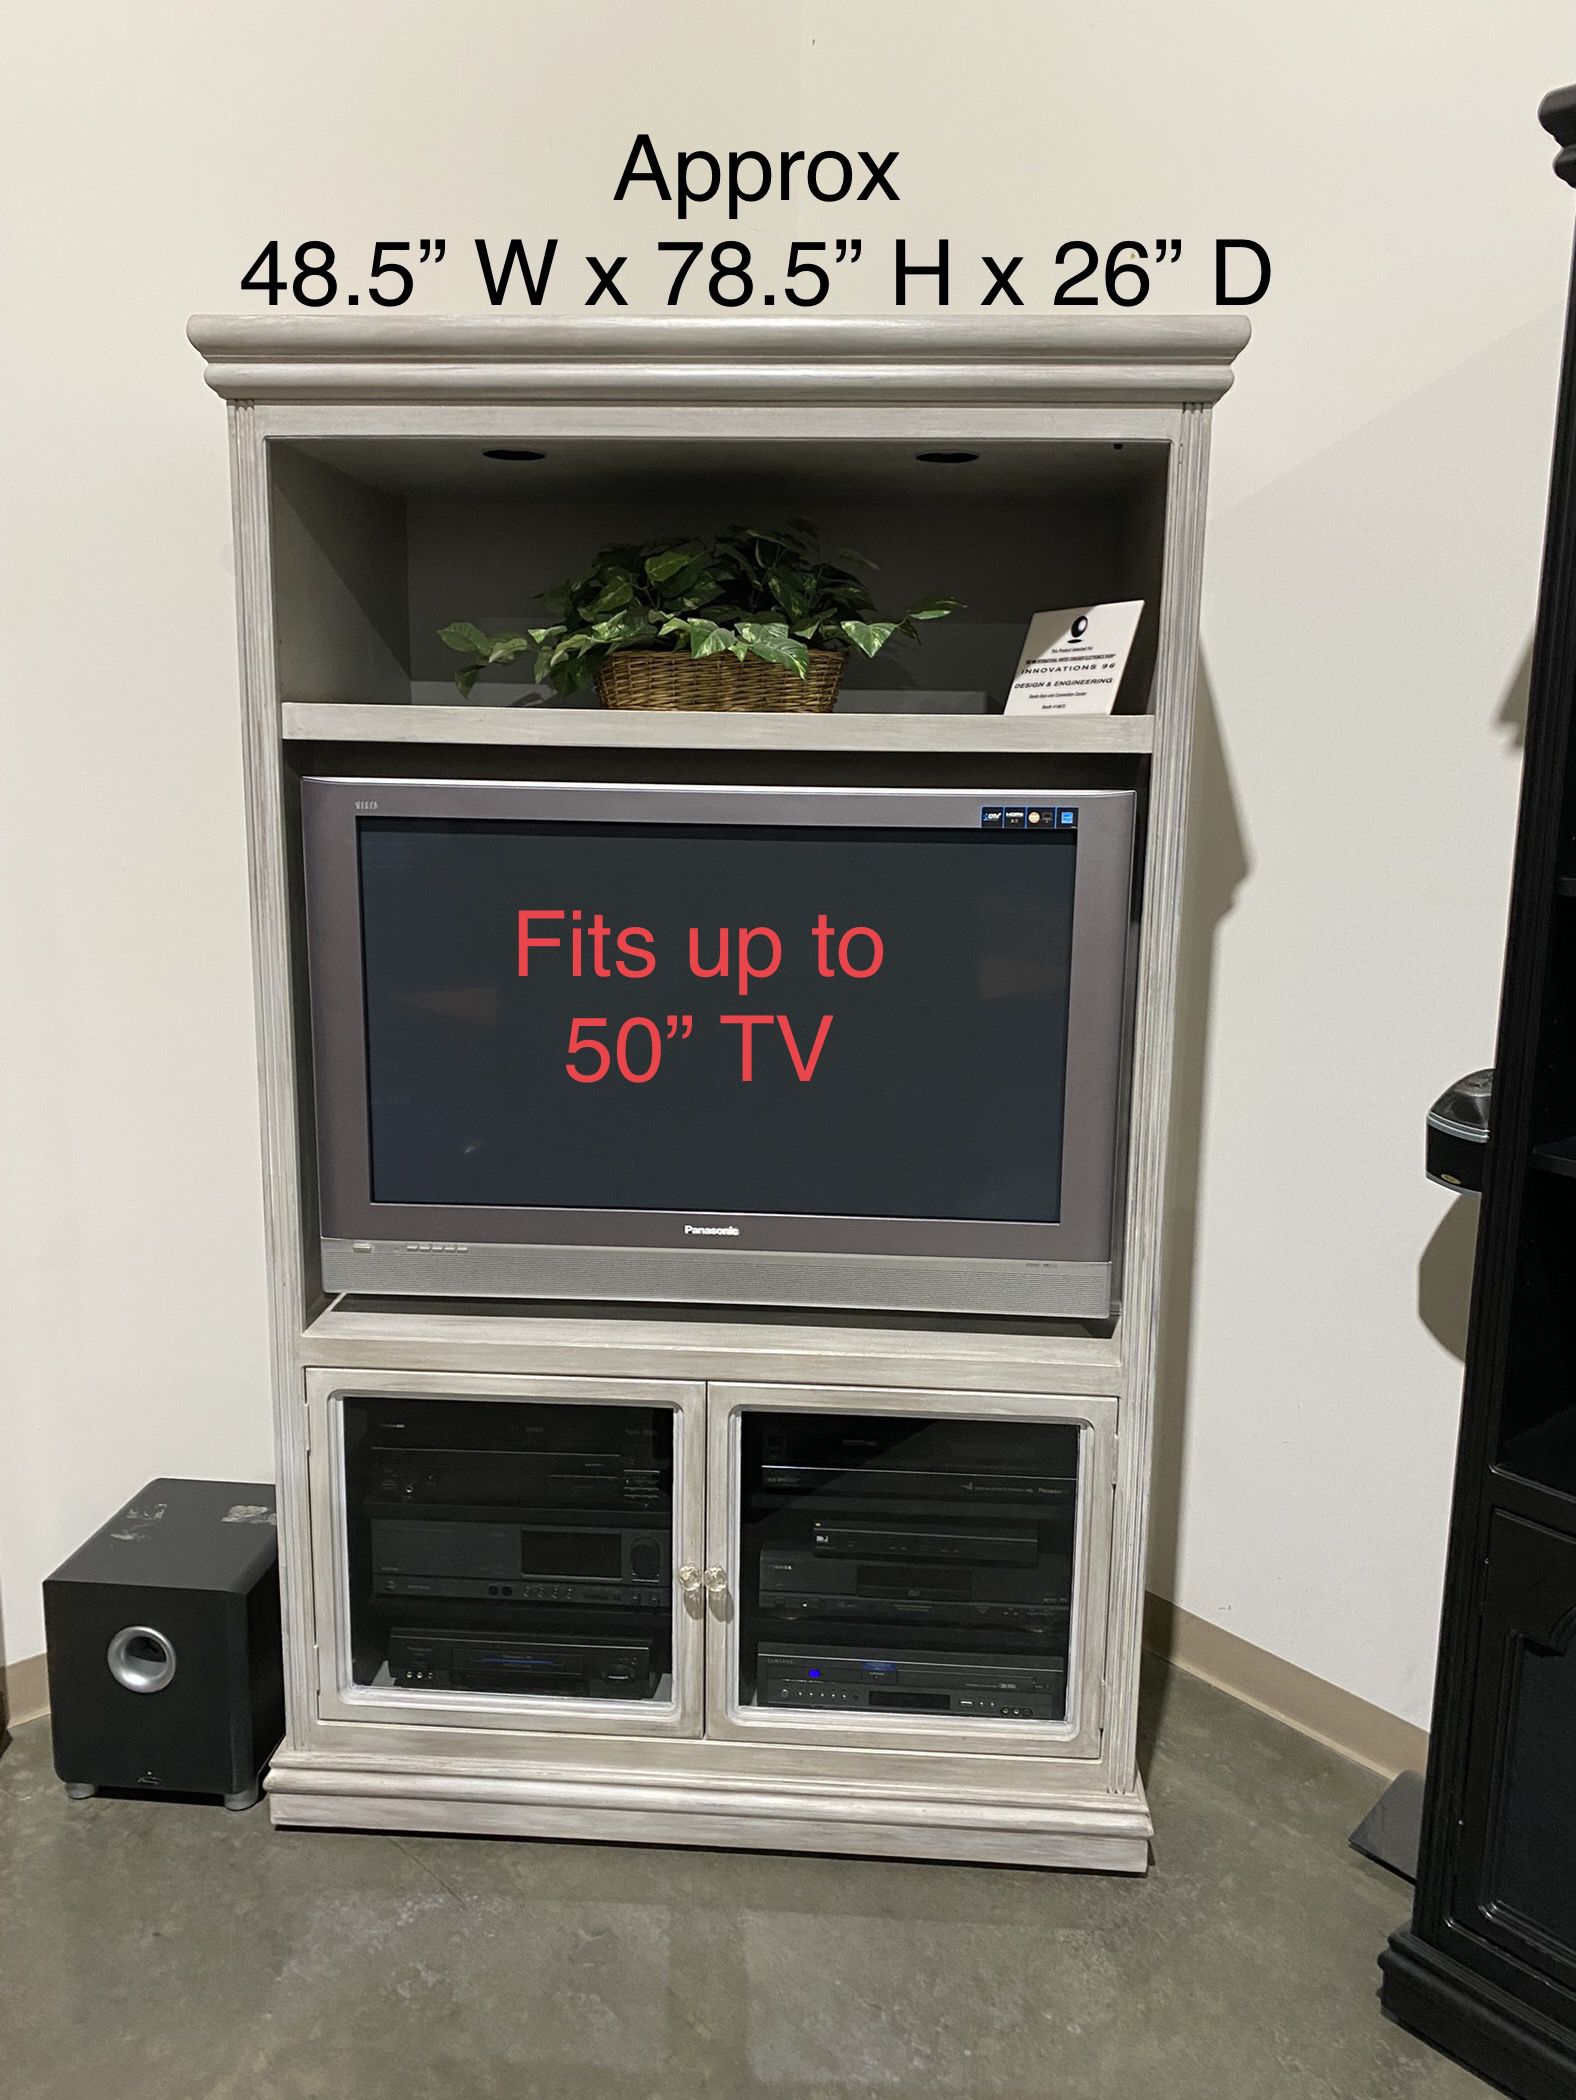 FREE 🆓 Entertainment Center For Up To A 50” TV - Will Call In Anaheim